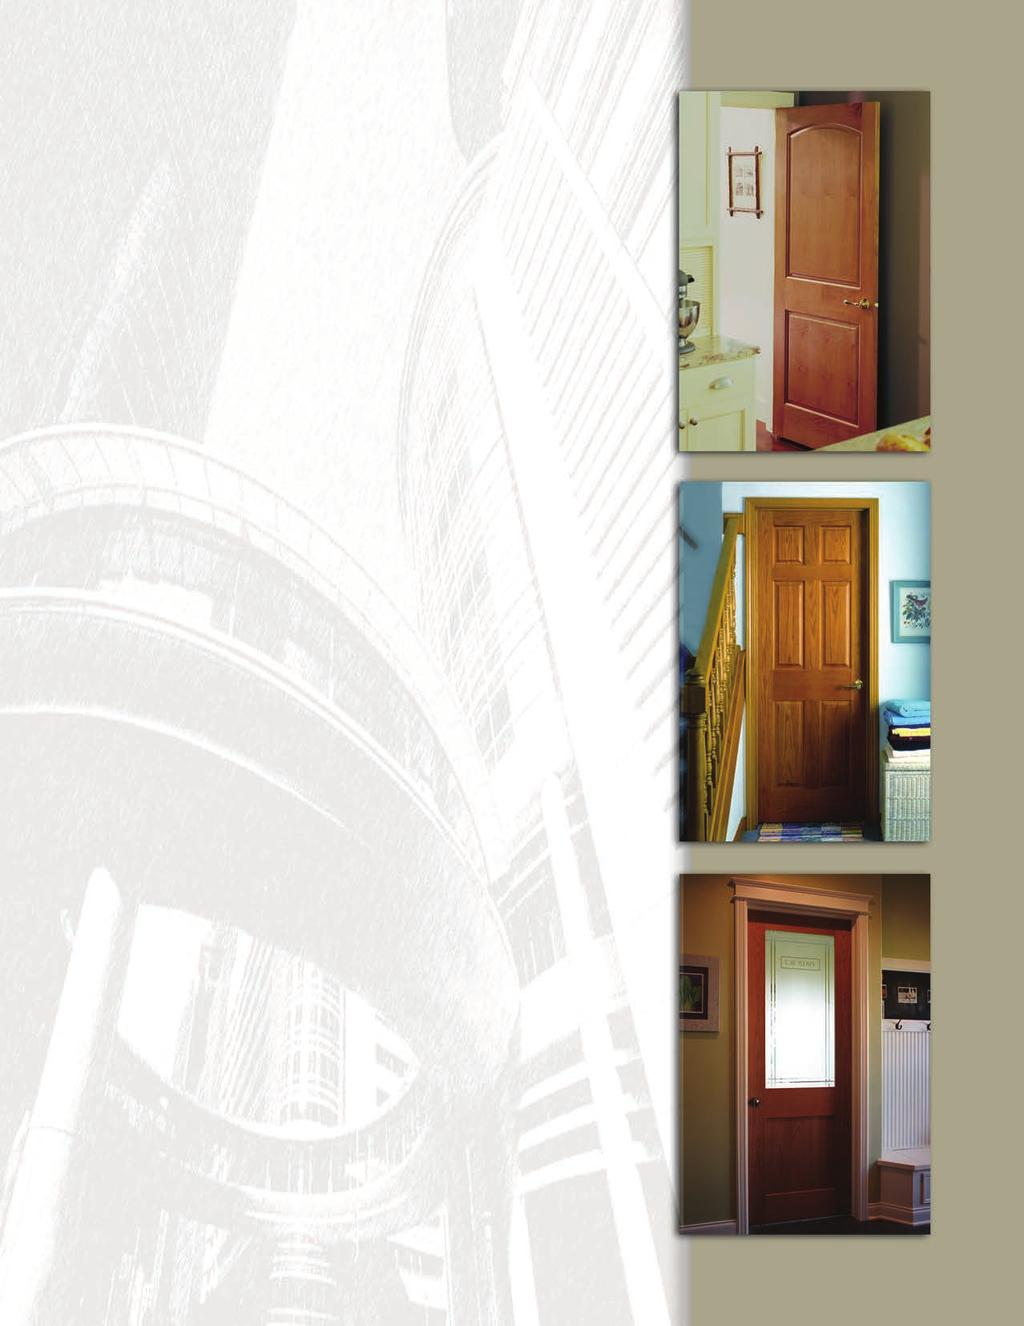 Quality Confidence Karona doors are designed with world-class engineering, and built with the highest quality materials, the finest workmanship, and state-of-the-art technology.